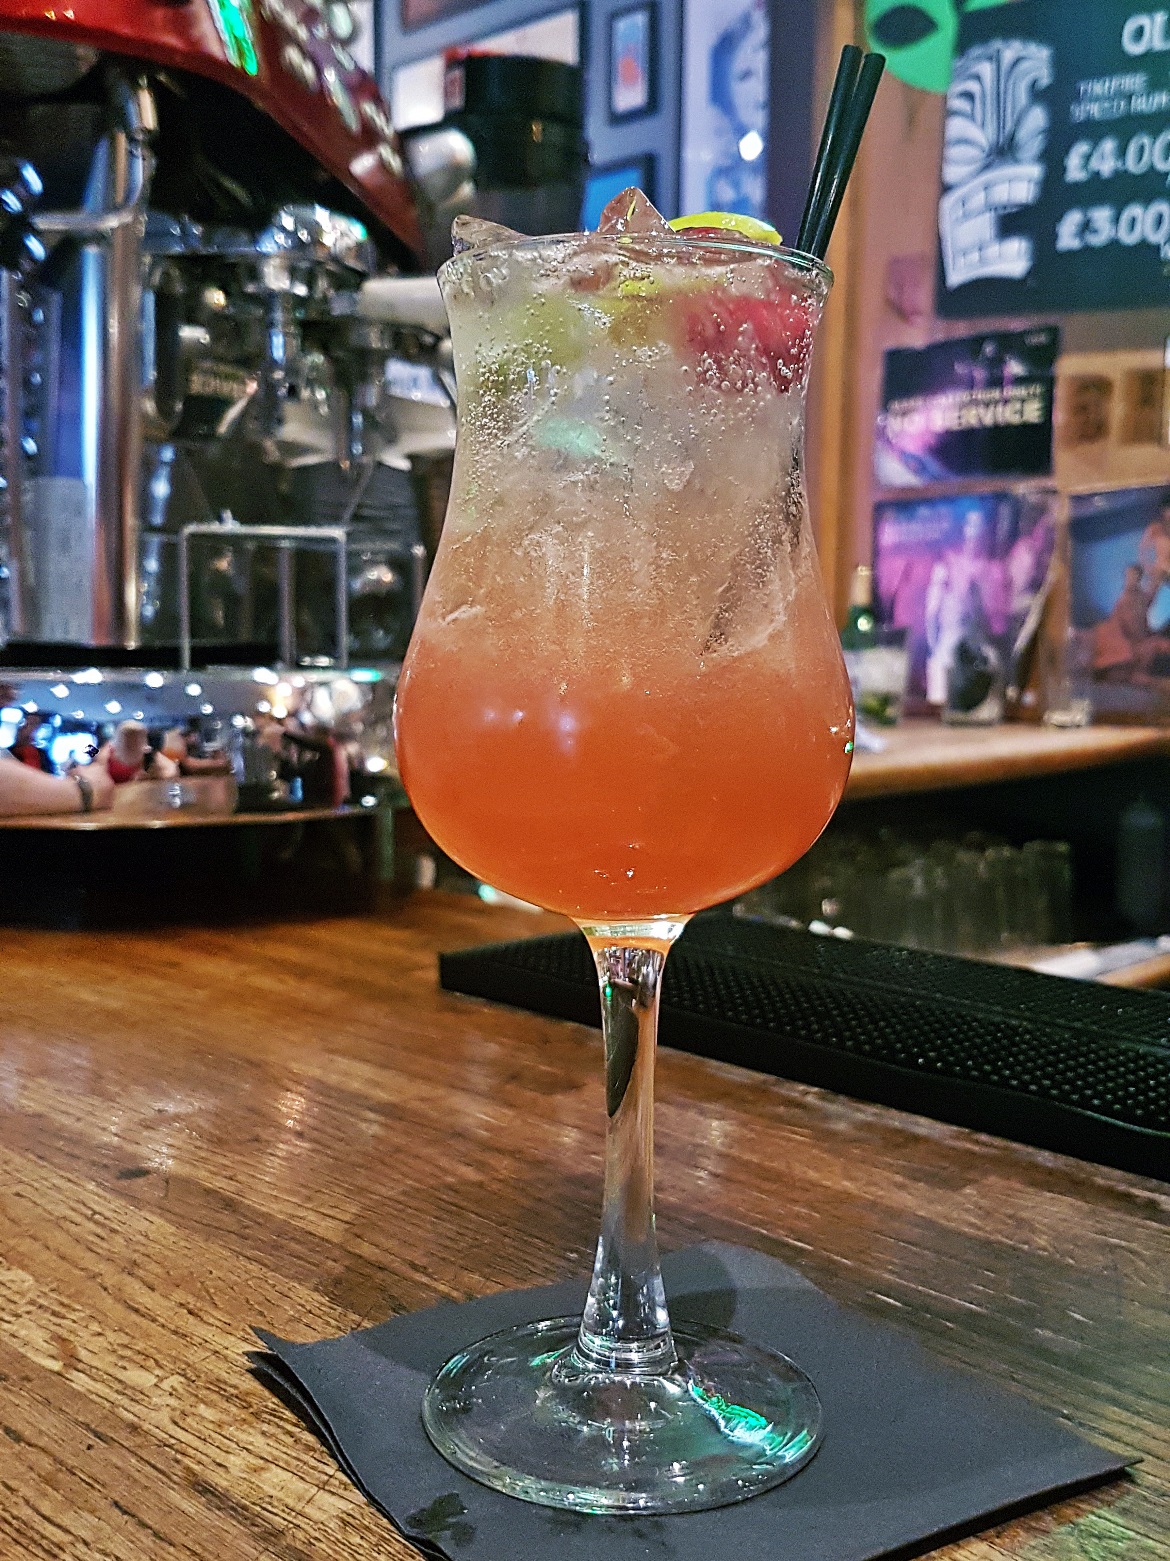 Cocktail at Vox in Huddersfield - July 2017 Recap by BeckyBecky Blogs